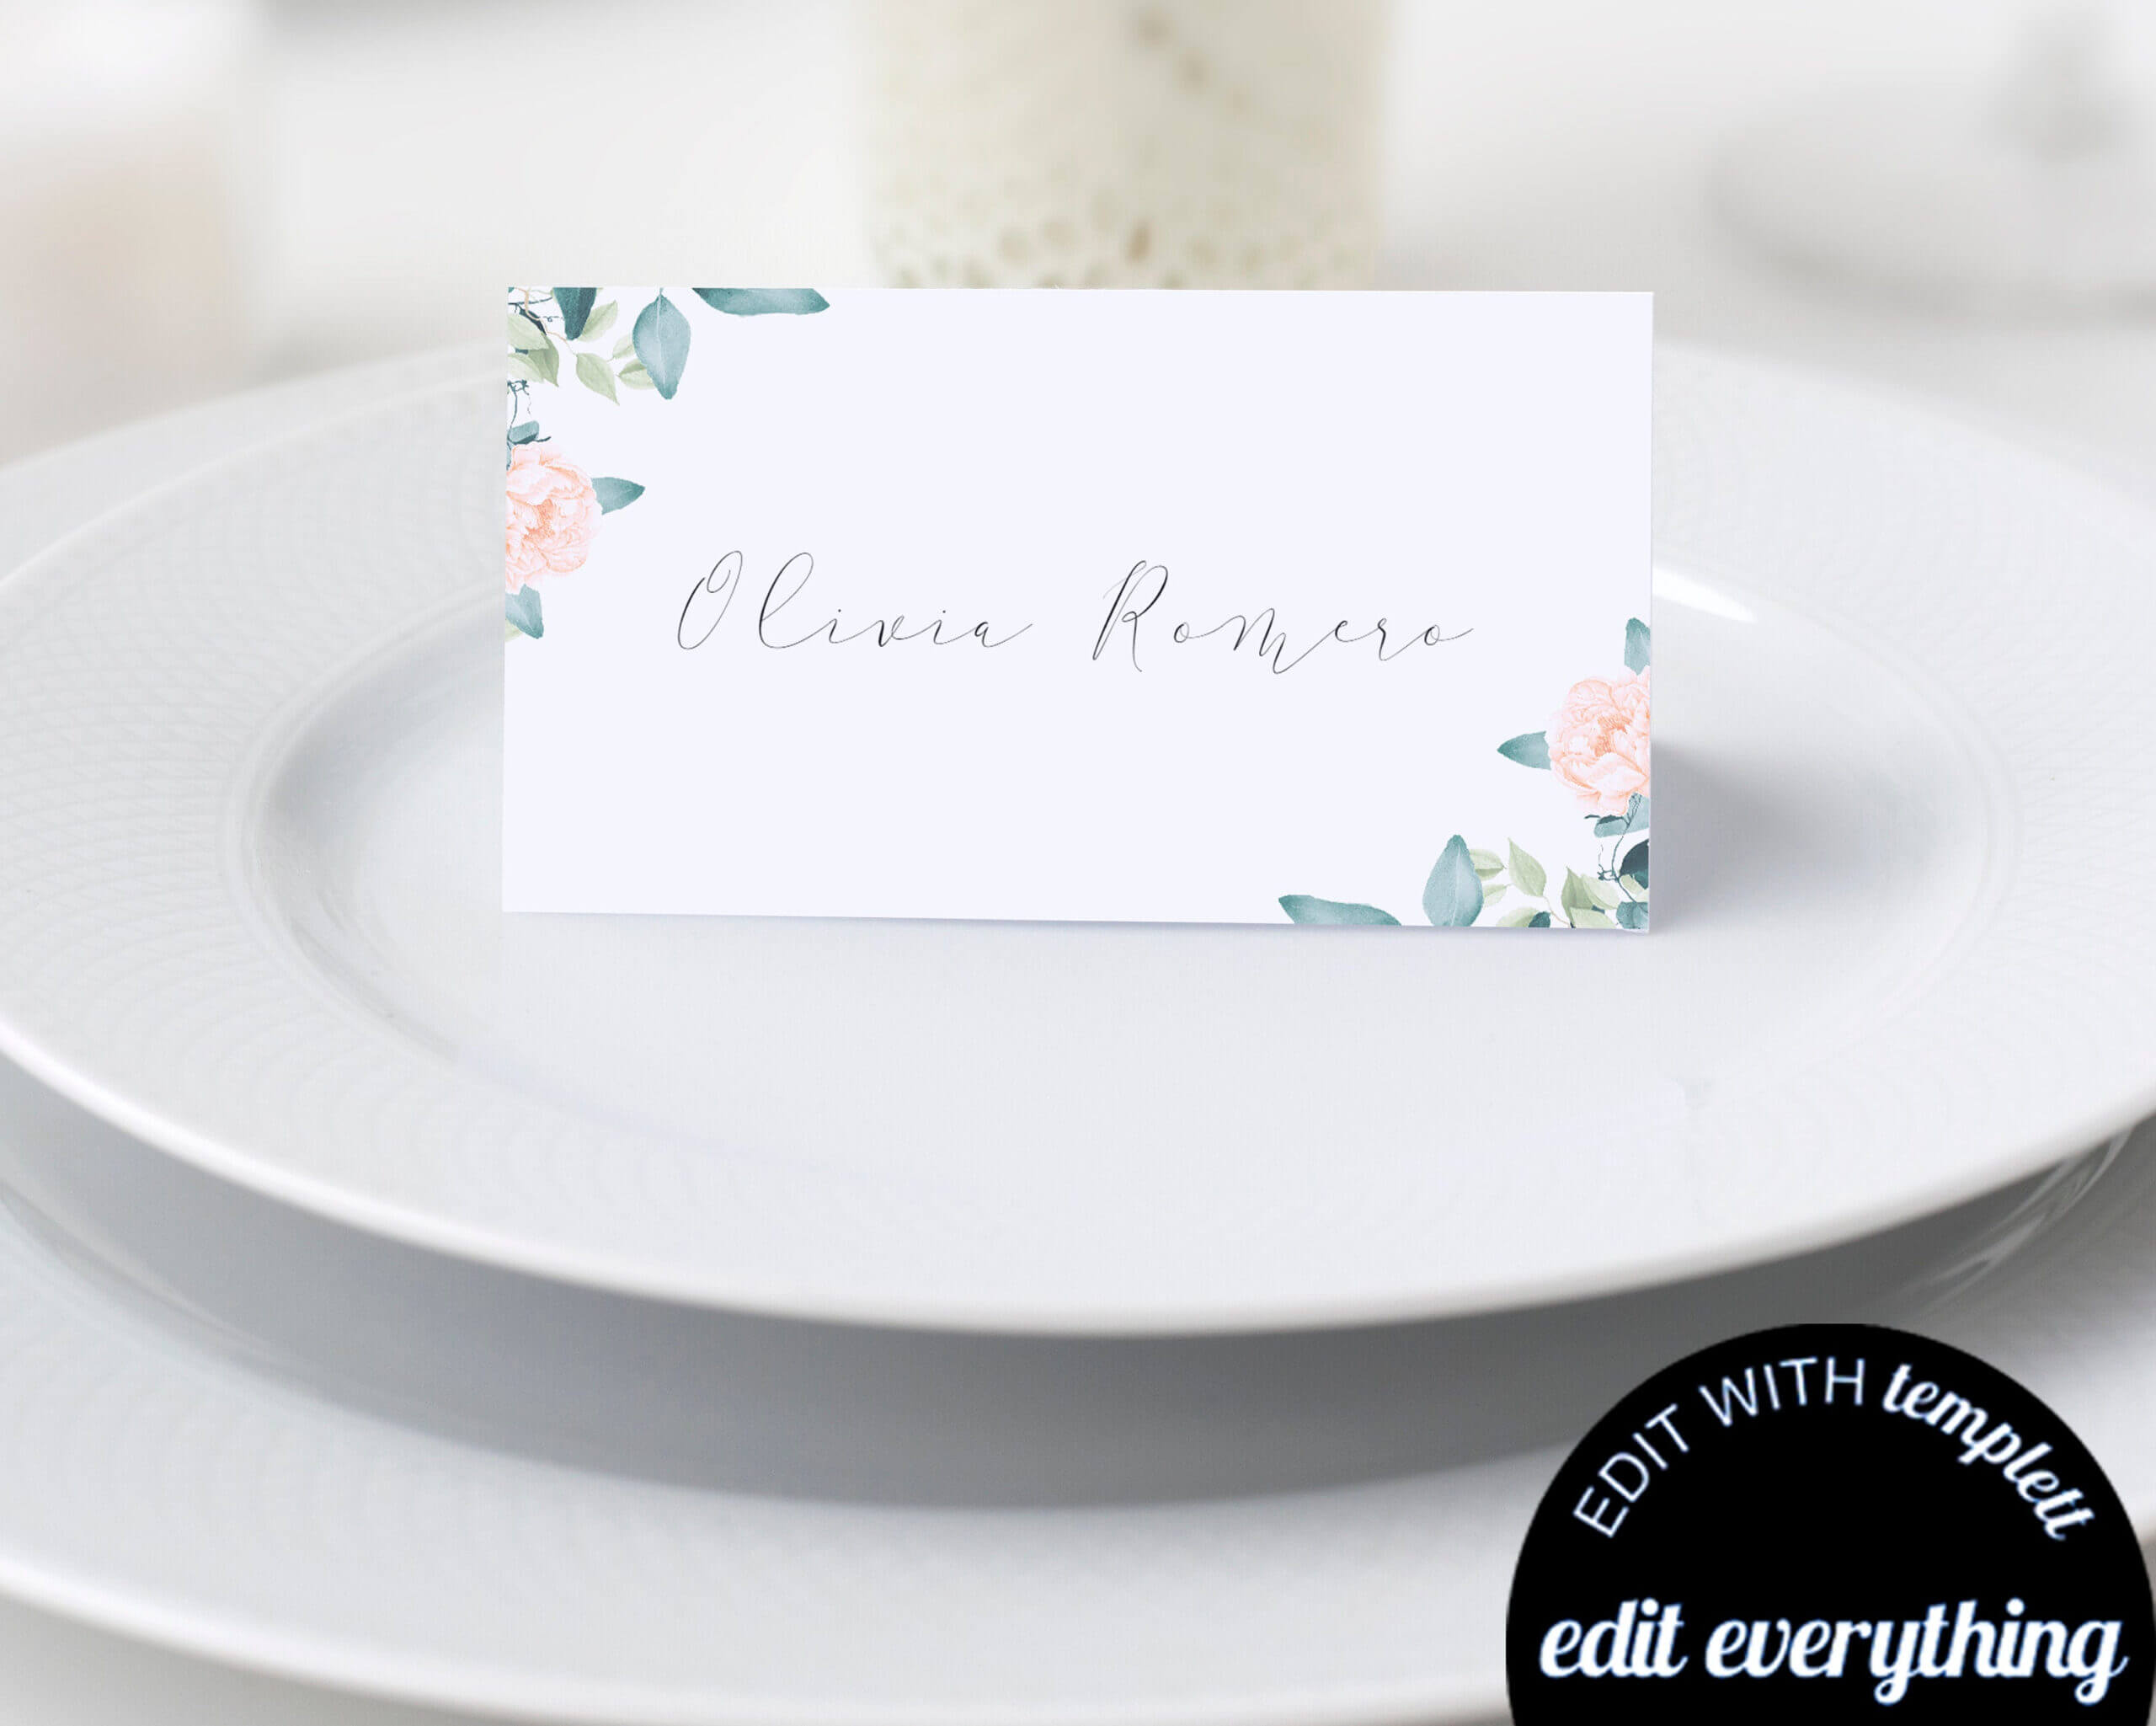 019 Template For Place Cards Il Fullxfull 1542140750 Dg3V Intended For Free Place Card Templates 6 Per Page